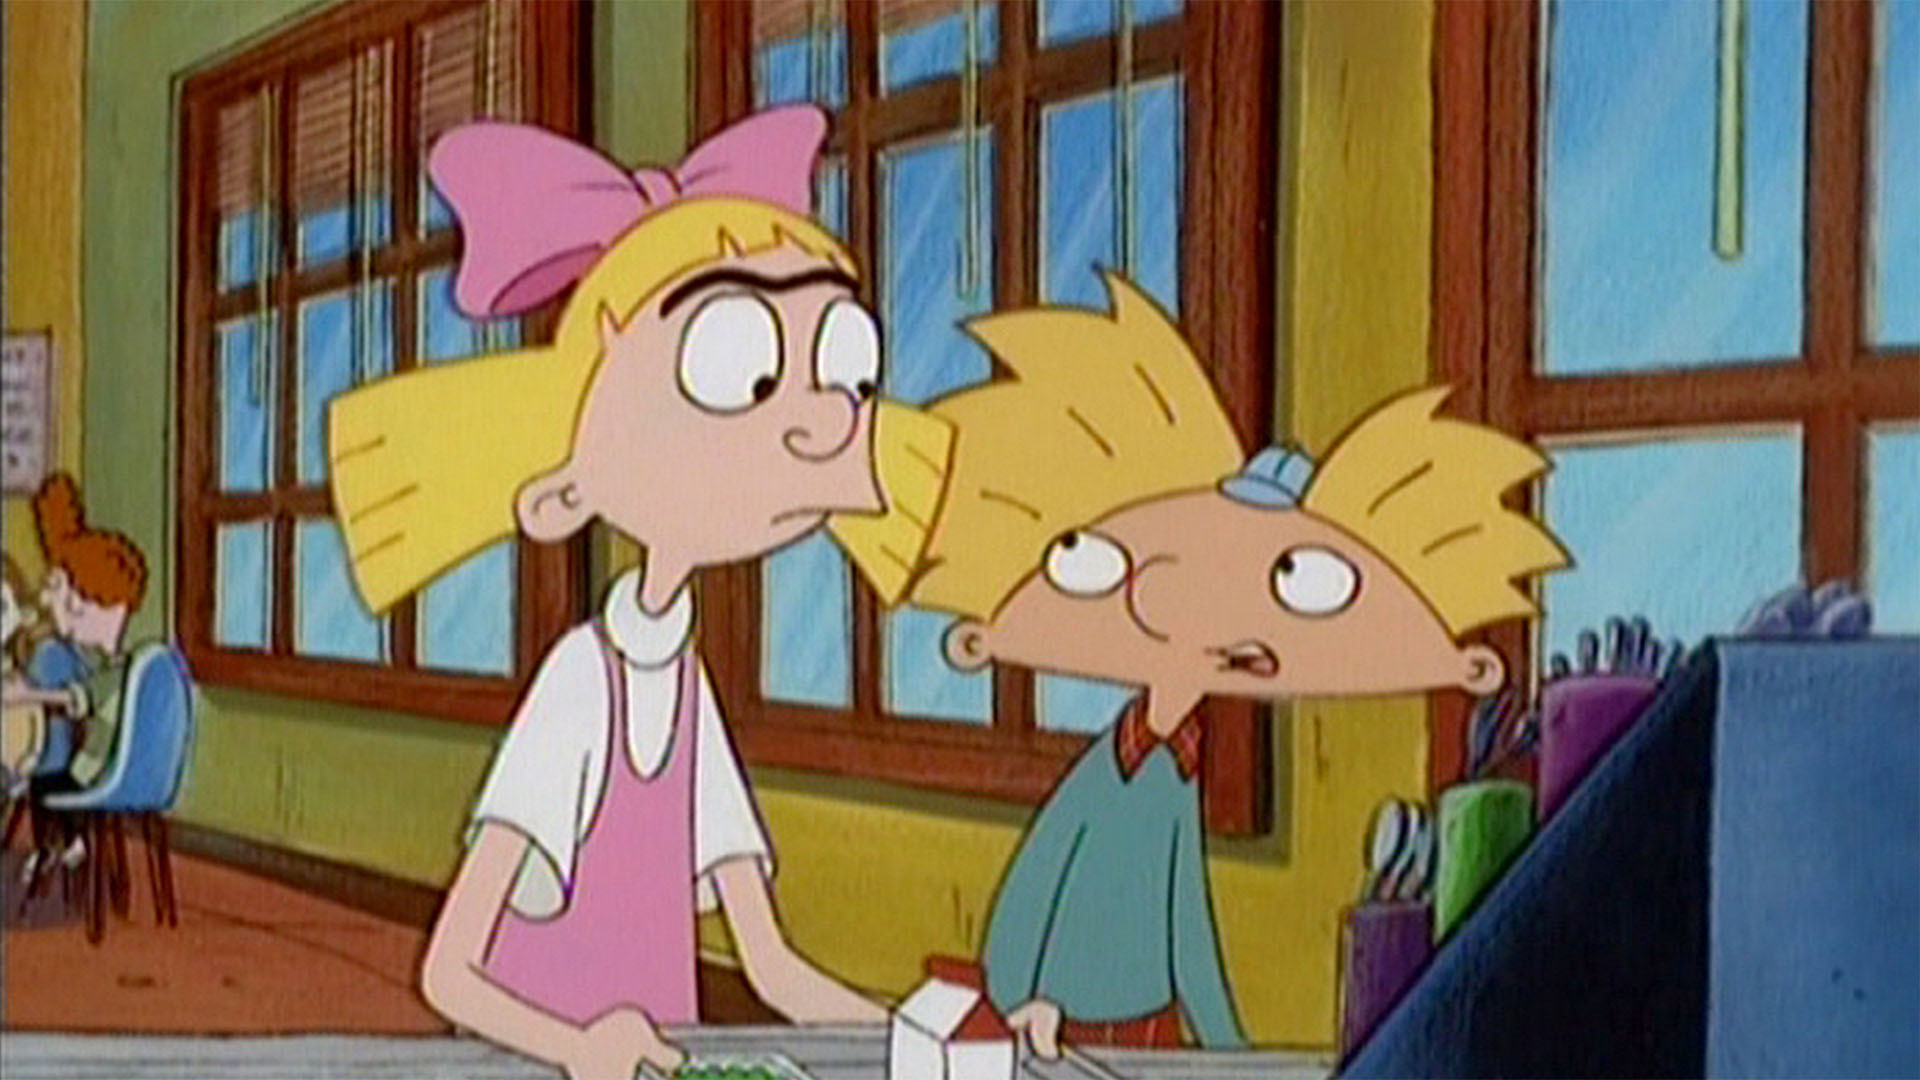 watch-hey-arnold-season-3-episode-11-phoebe-takes-the-fall-the-pig-war-full-show-on